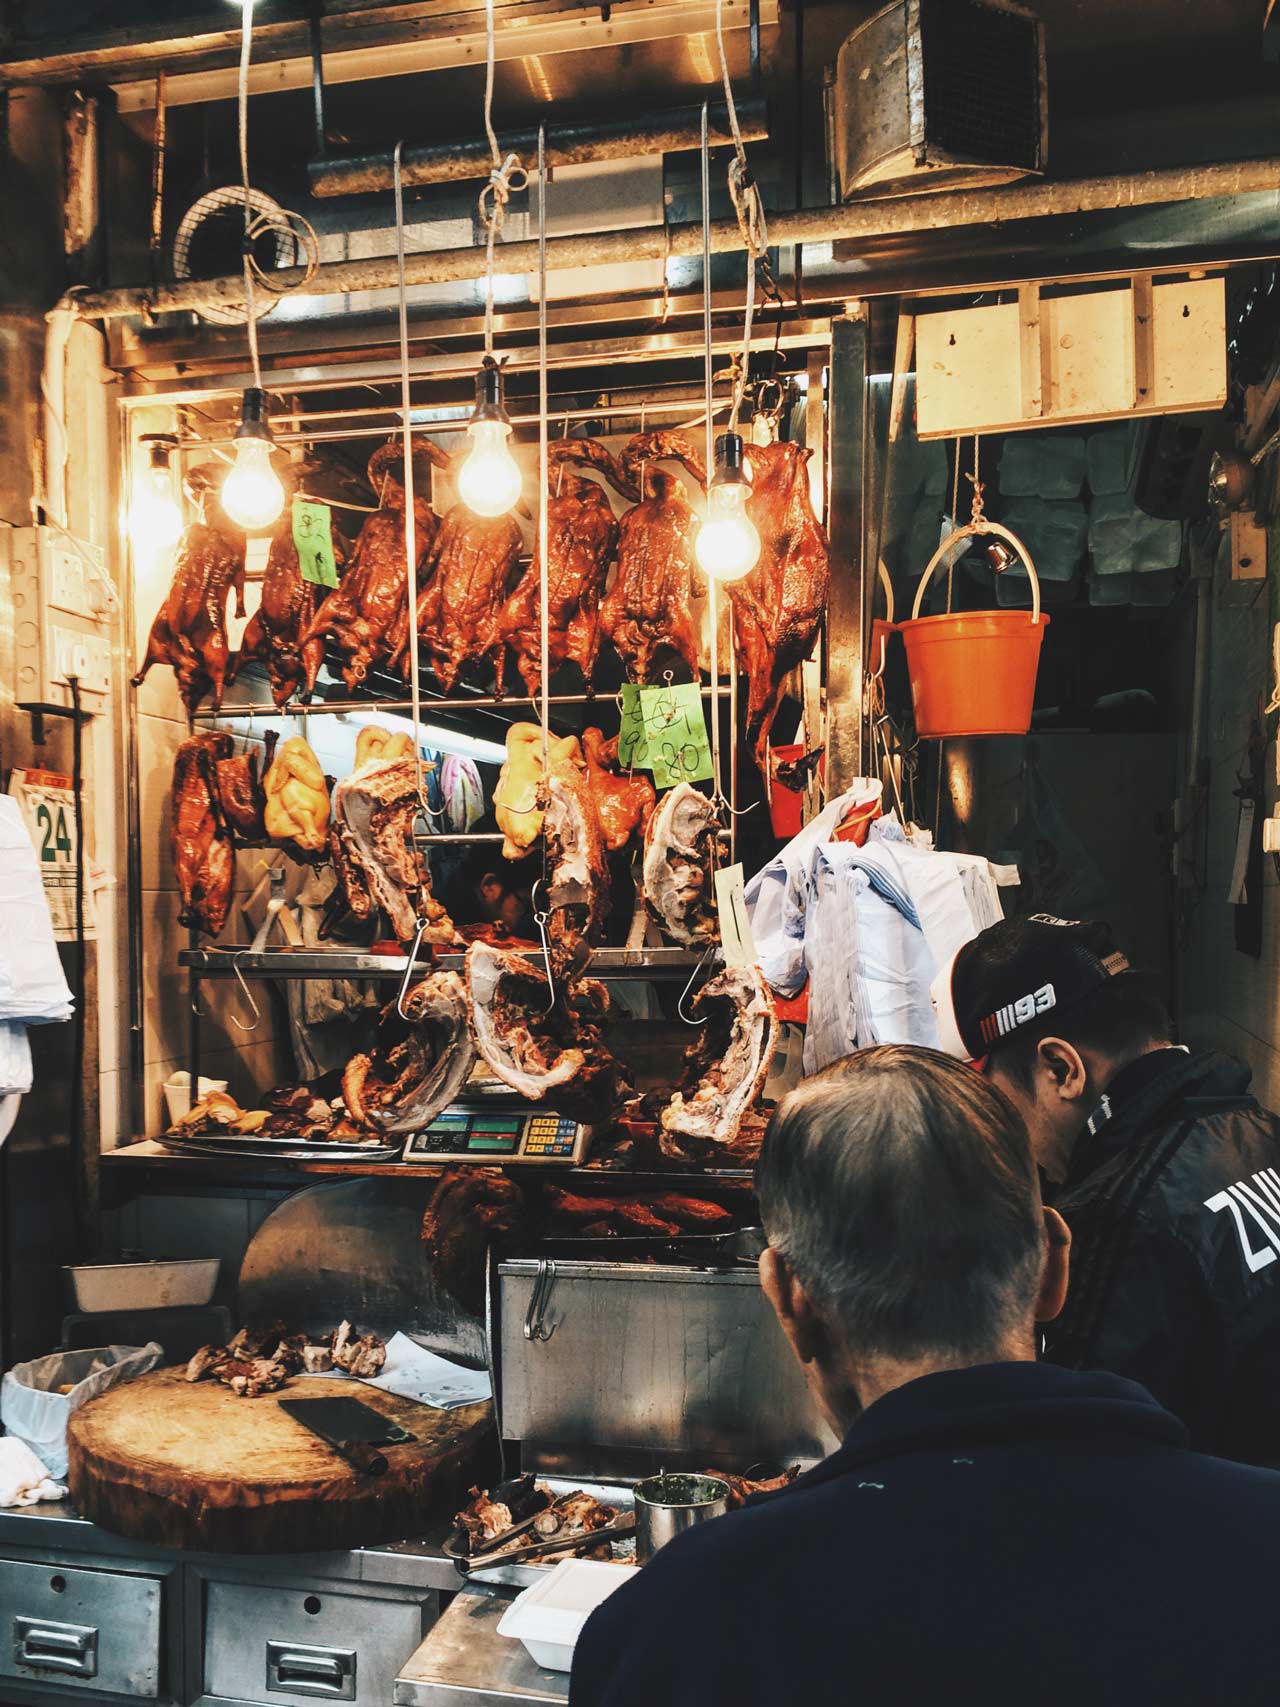 The Hong Kong Street Food That's Taking Over Instagram